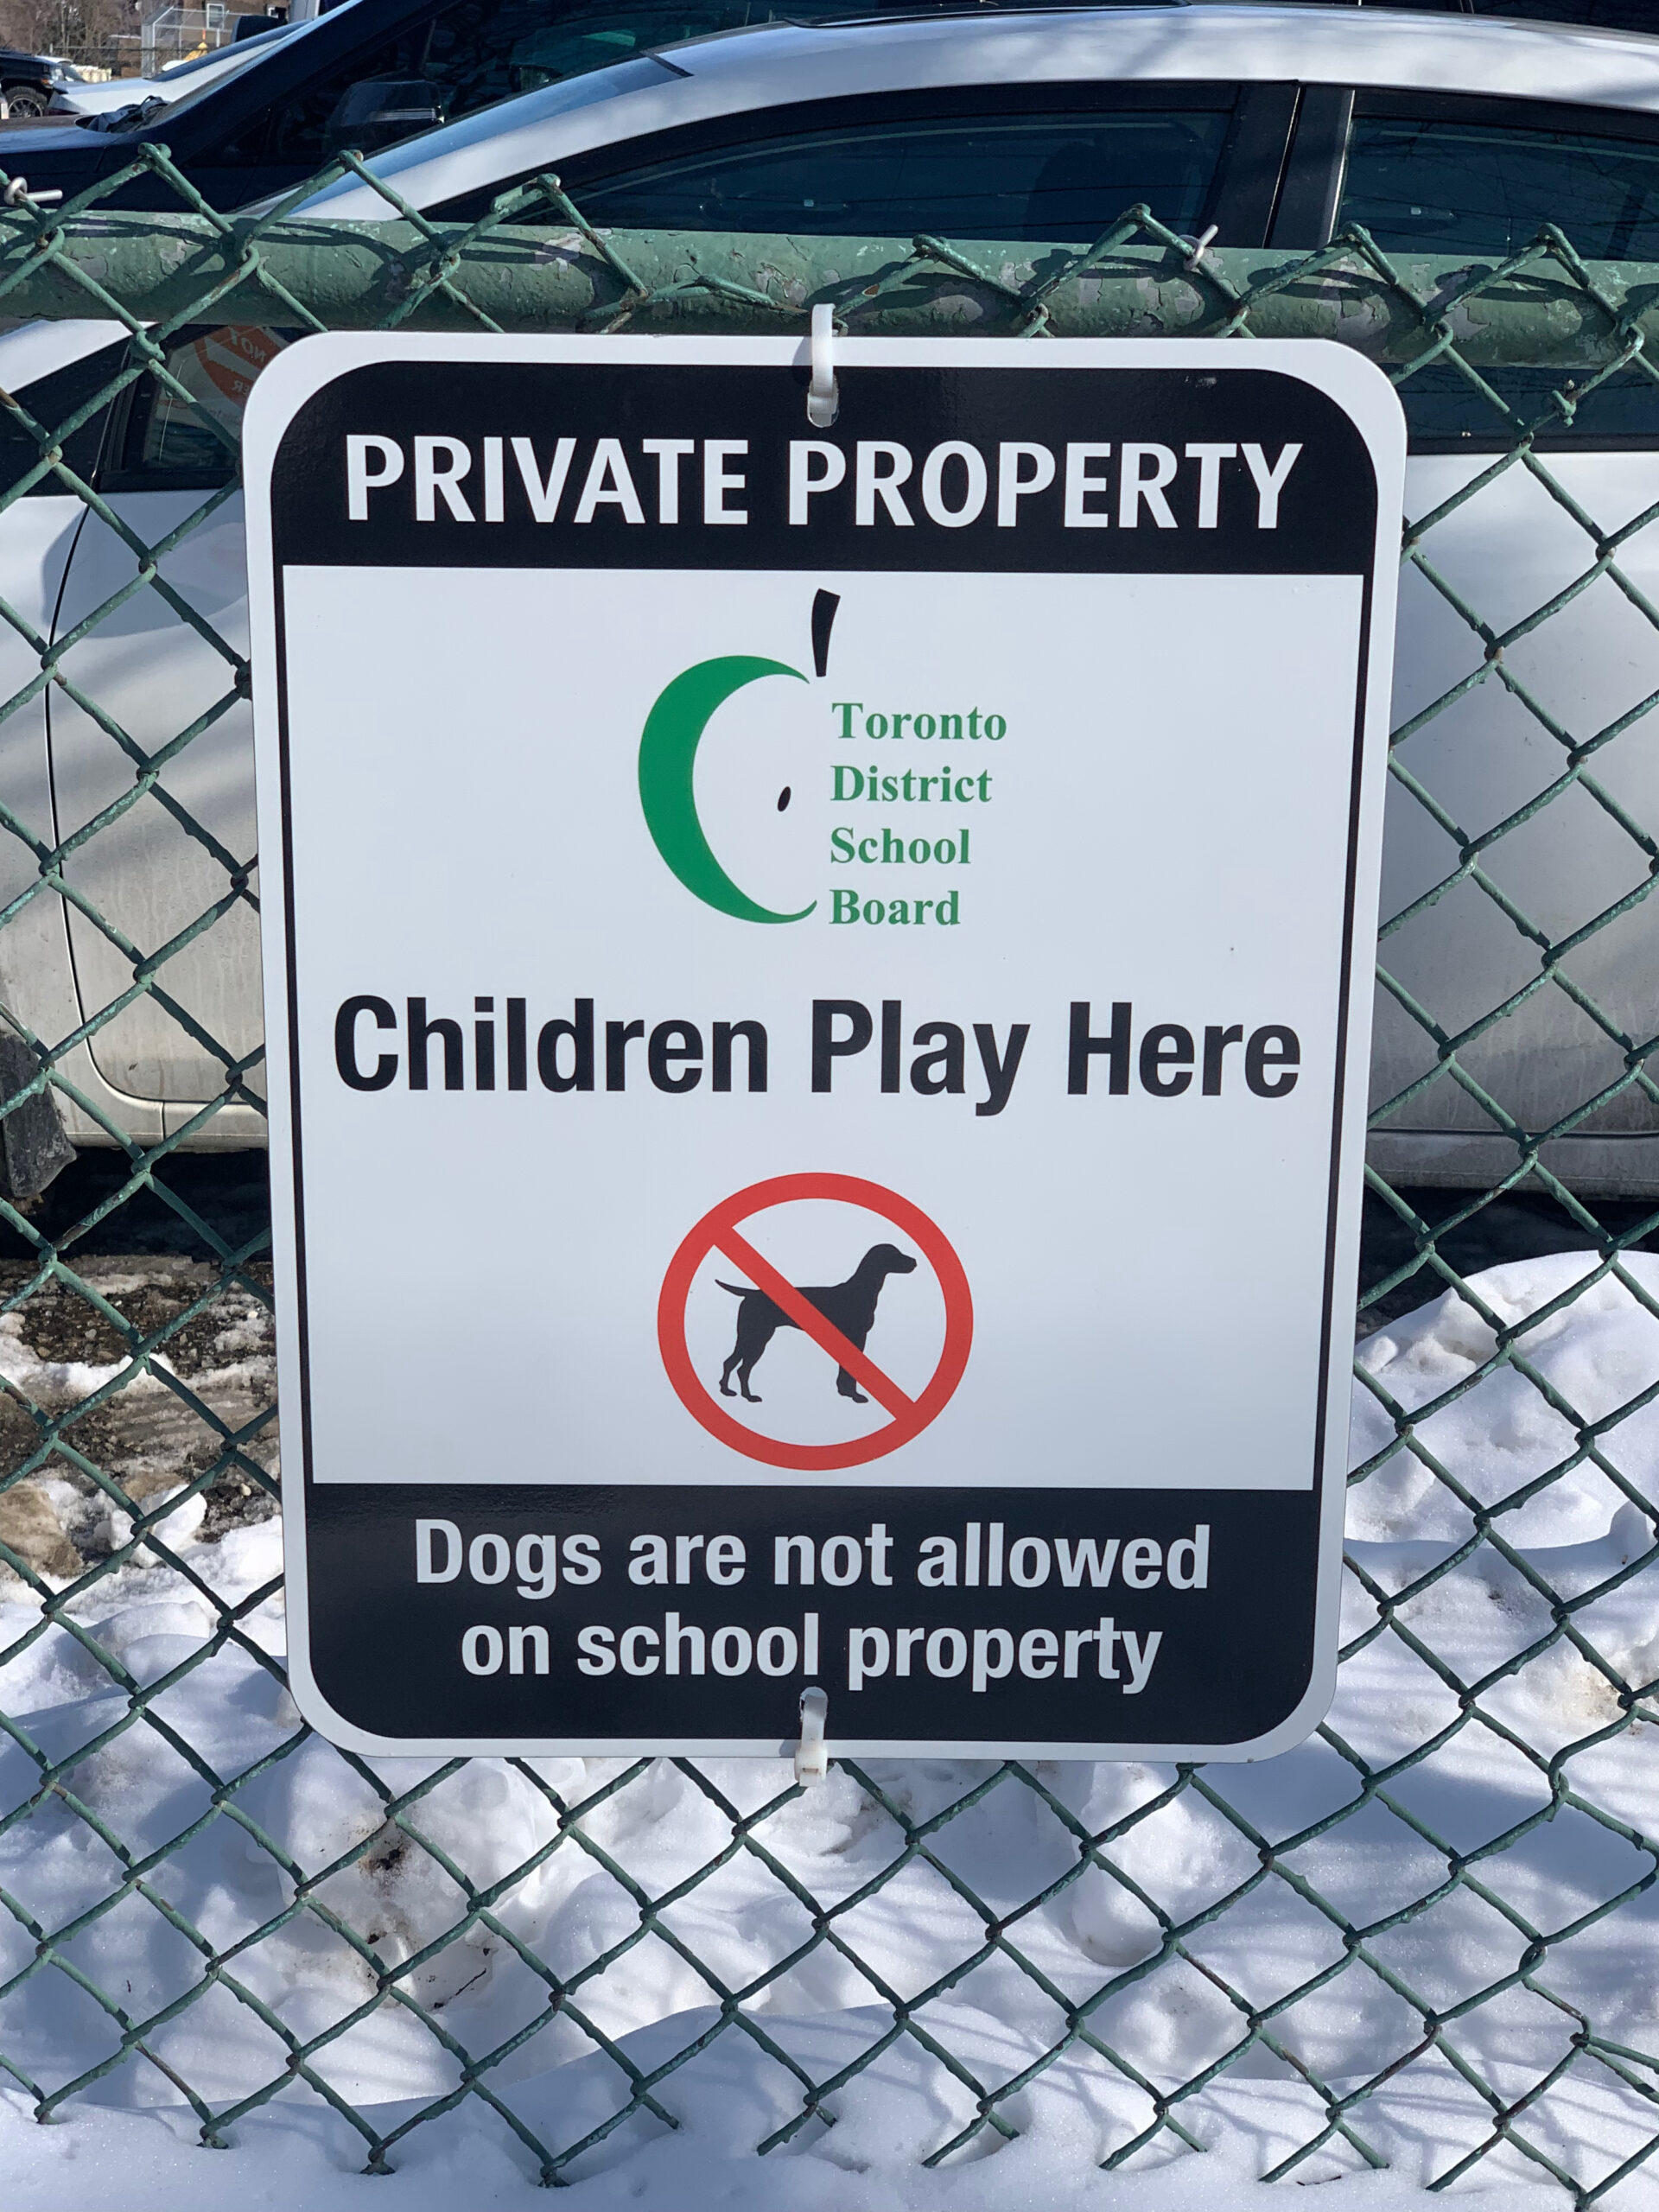 Photo of "Children Play here" sign, telling people not to have dogs on school property.